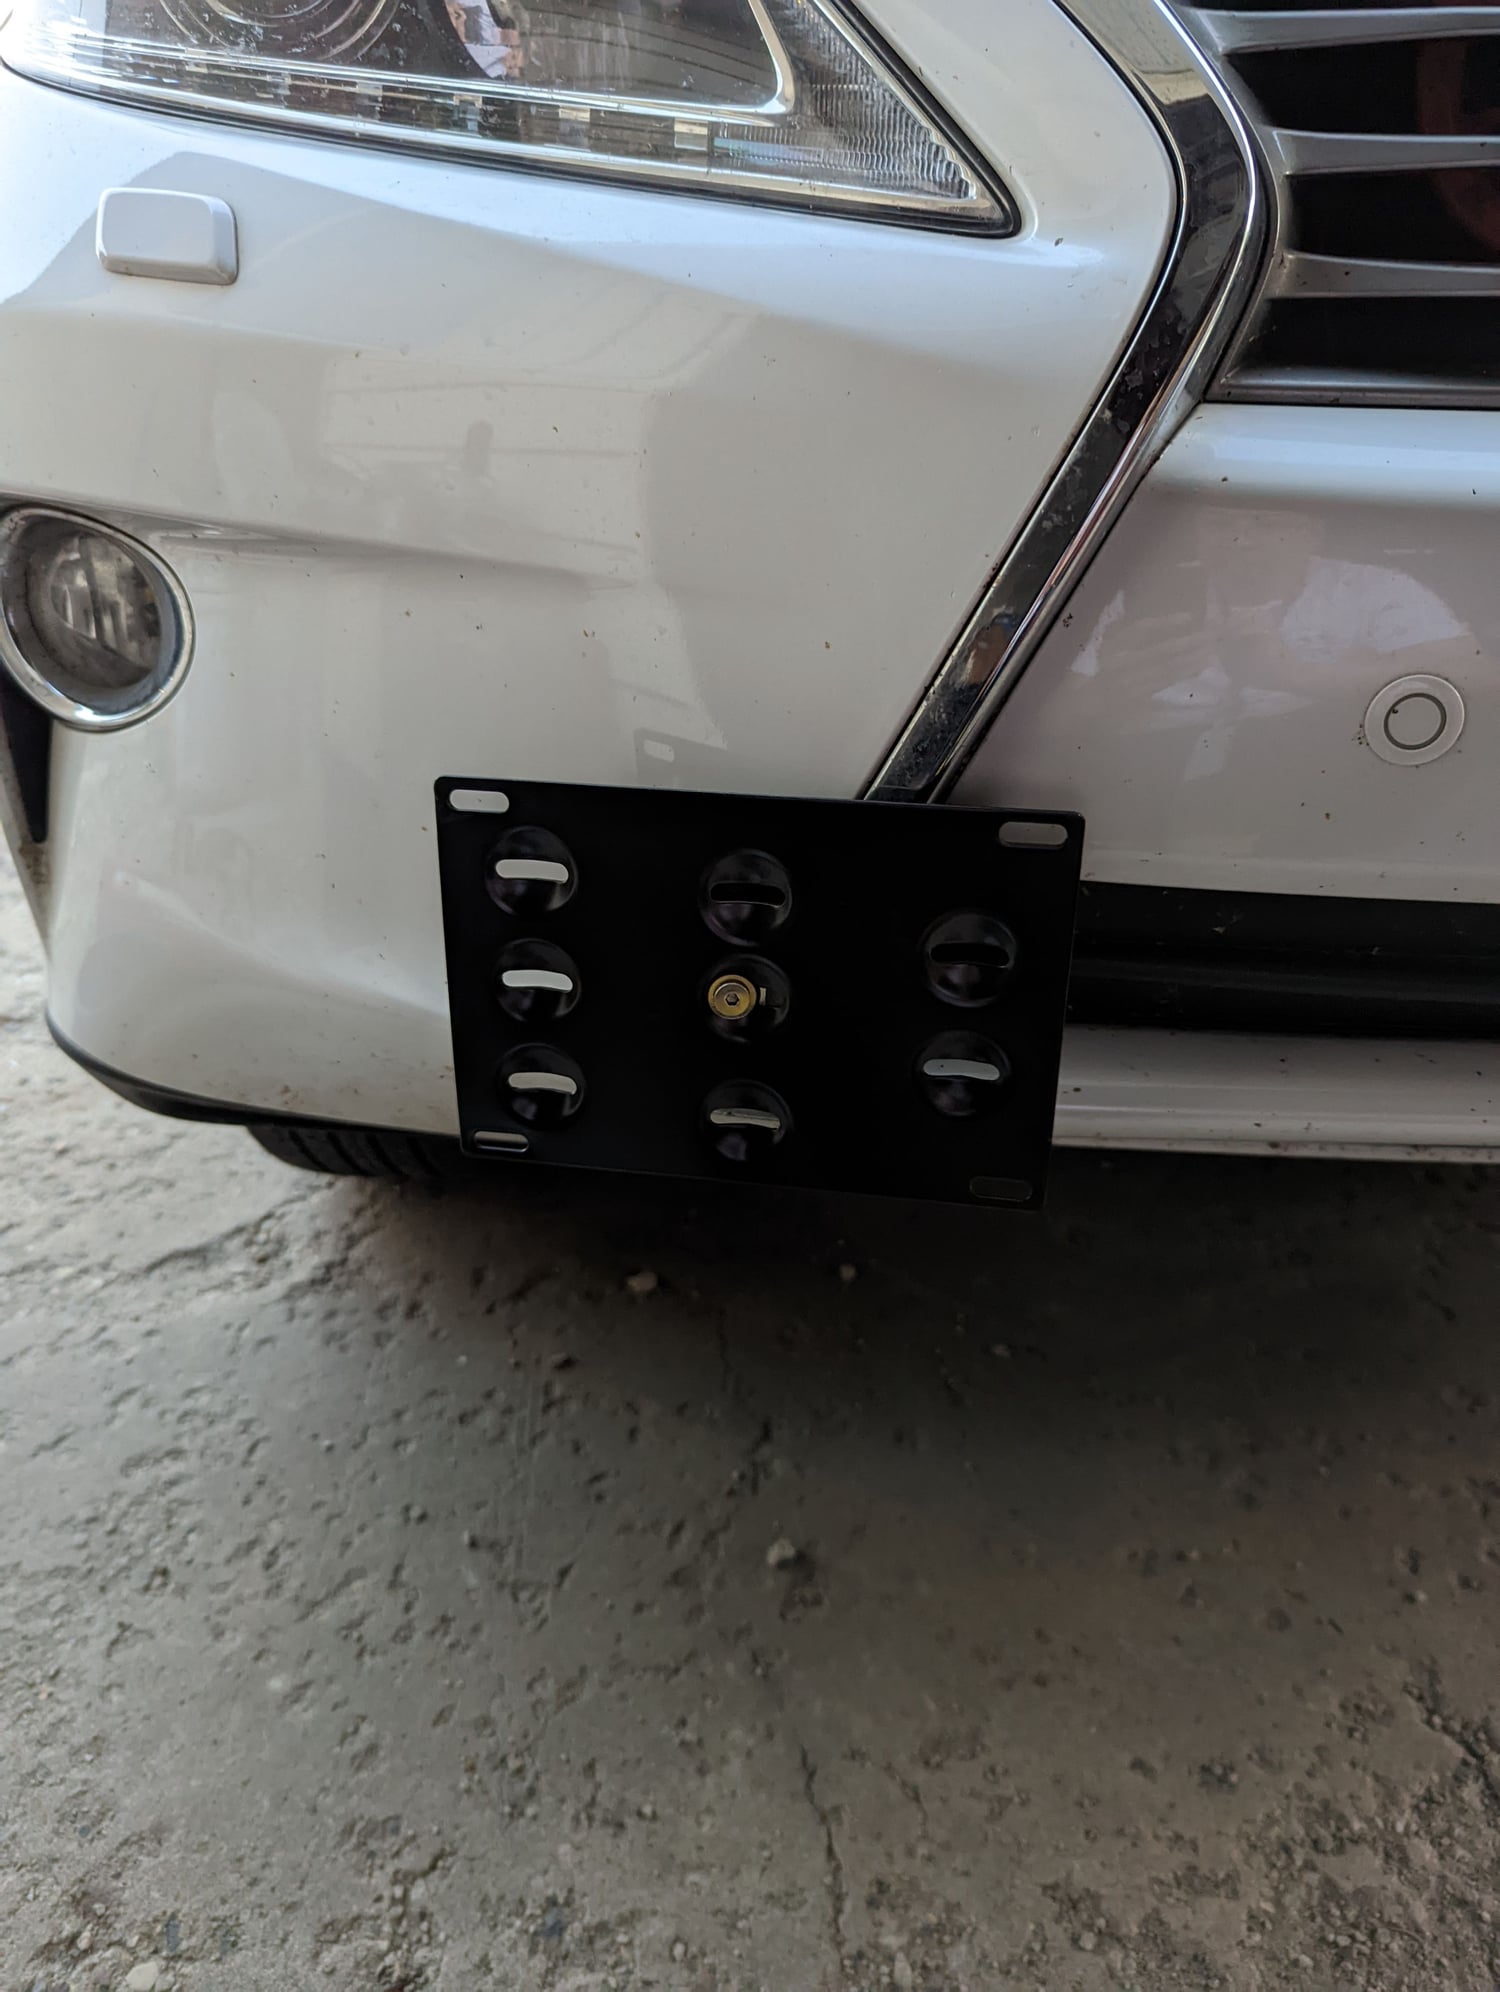 Tow Hook License Plate Adapter? - ClubLexus - Lexus Forum Discussion